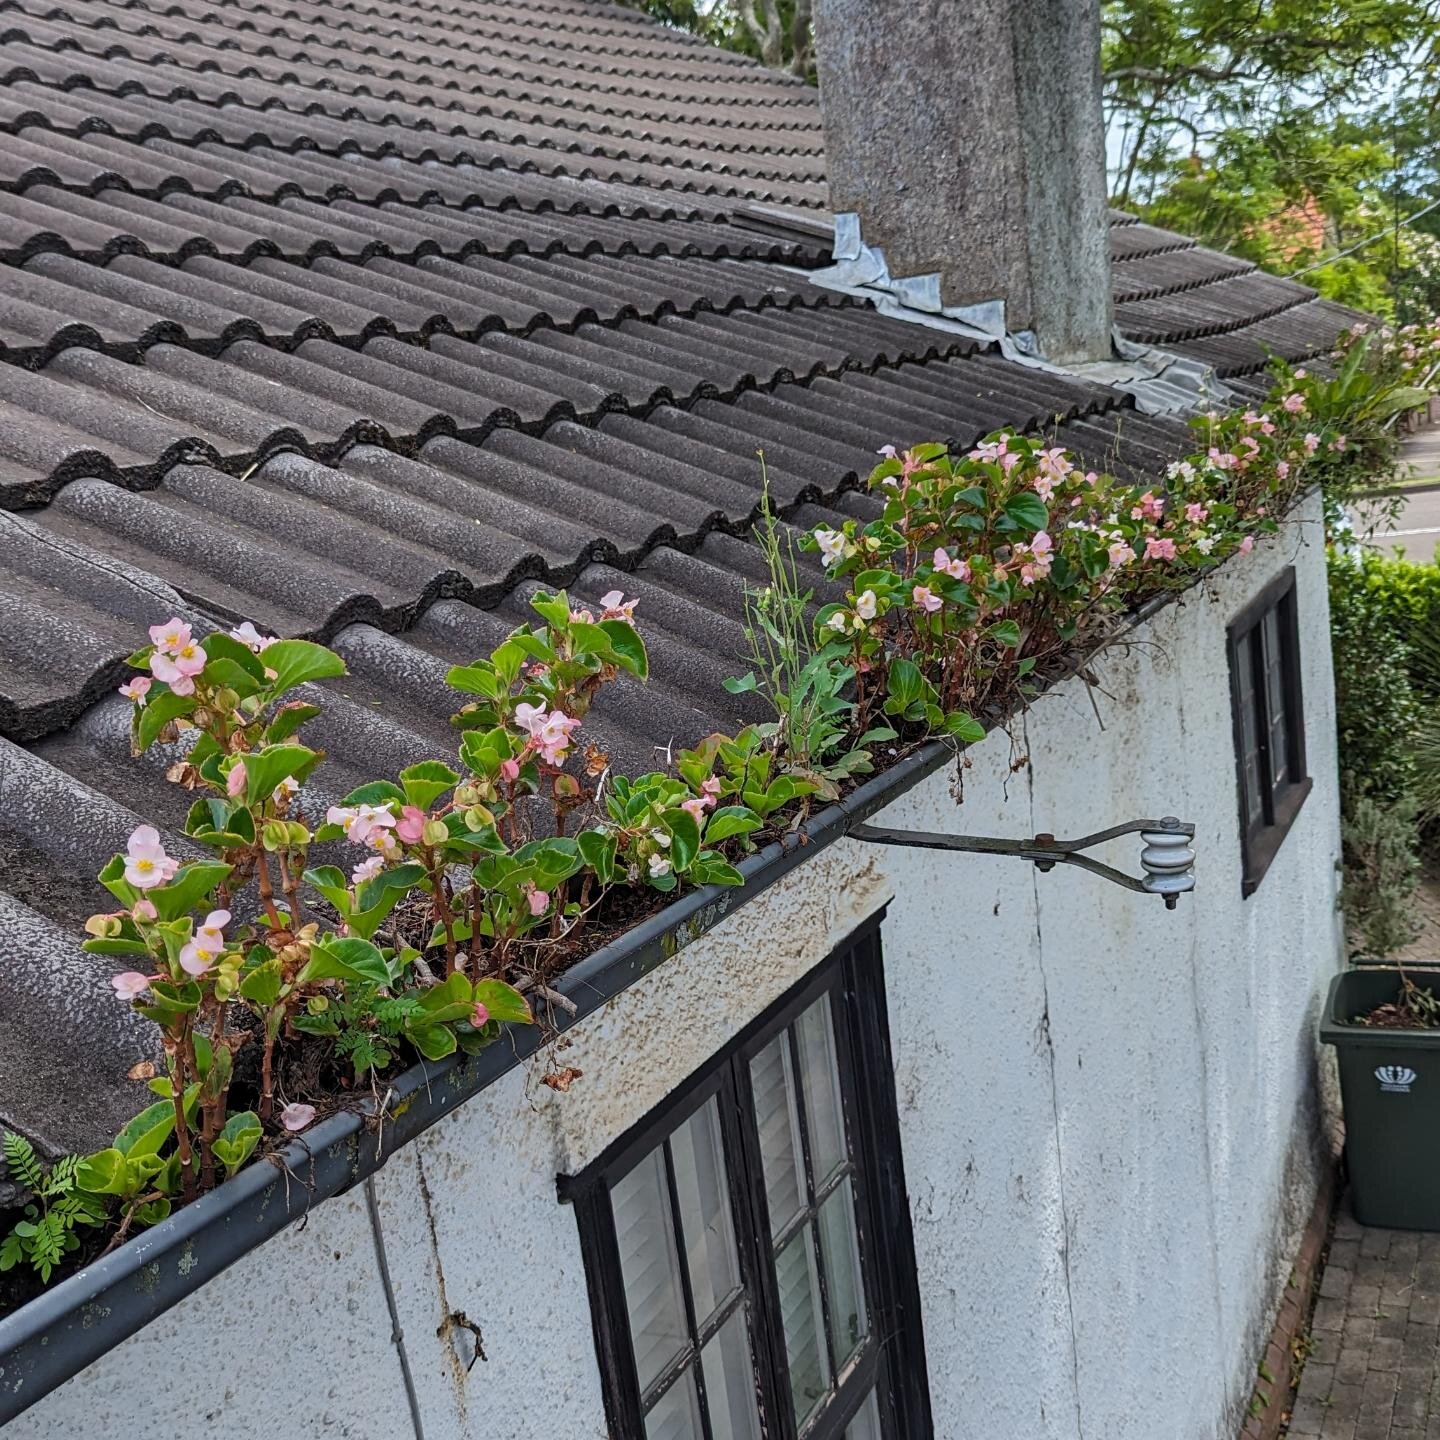 BEFORE &amp; AFTER - Some nice flowers growing throughout these gutters, but causing major water flow issues and damaging good quality gutters, downpipes and brackets. 

#guttercleaning #guttercleaningservices #guttermaintenance  #gutterpromaintenanc